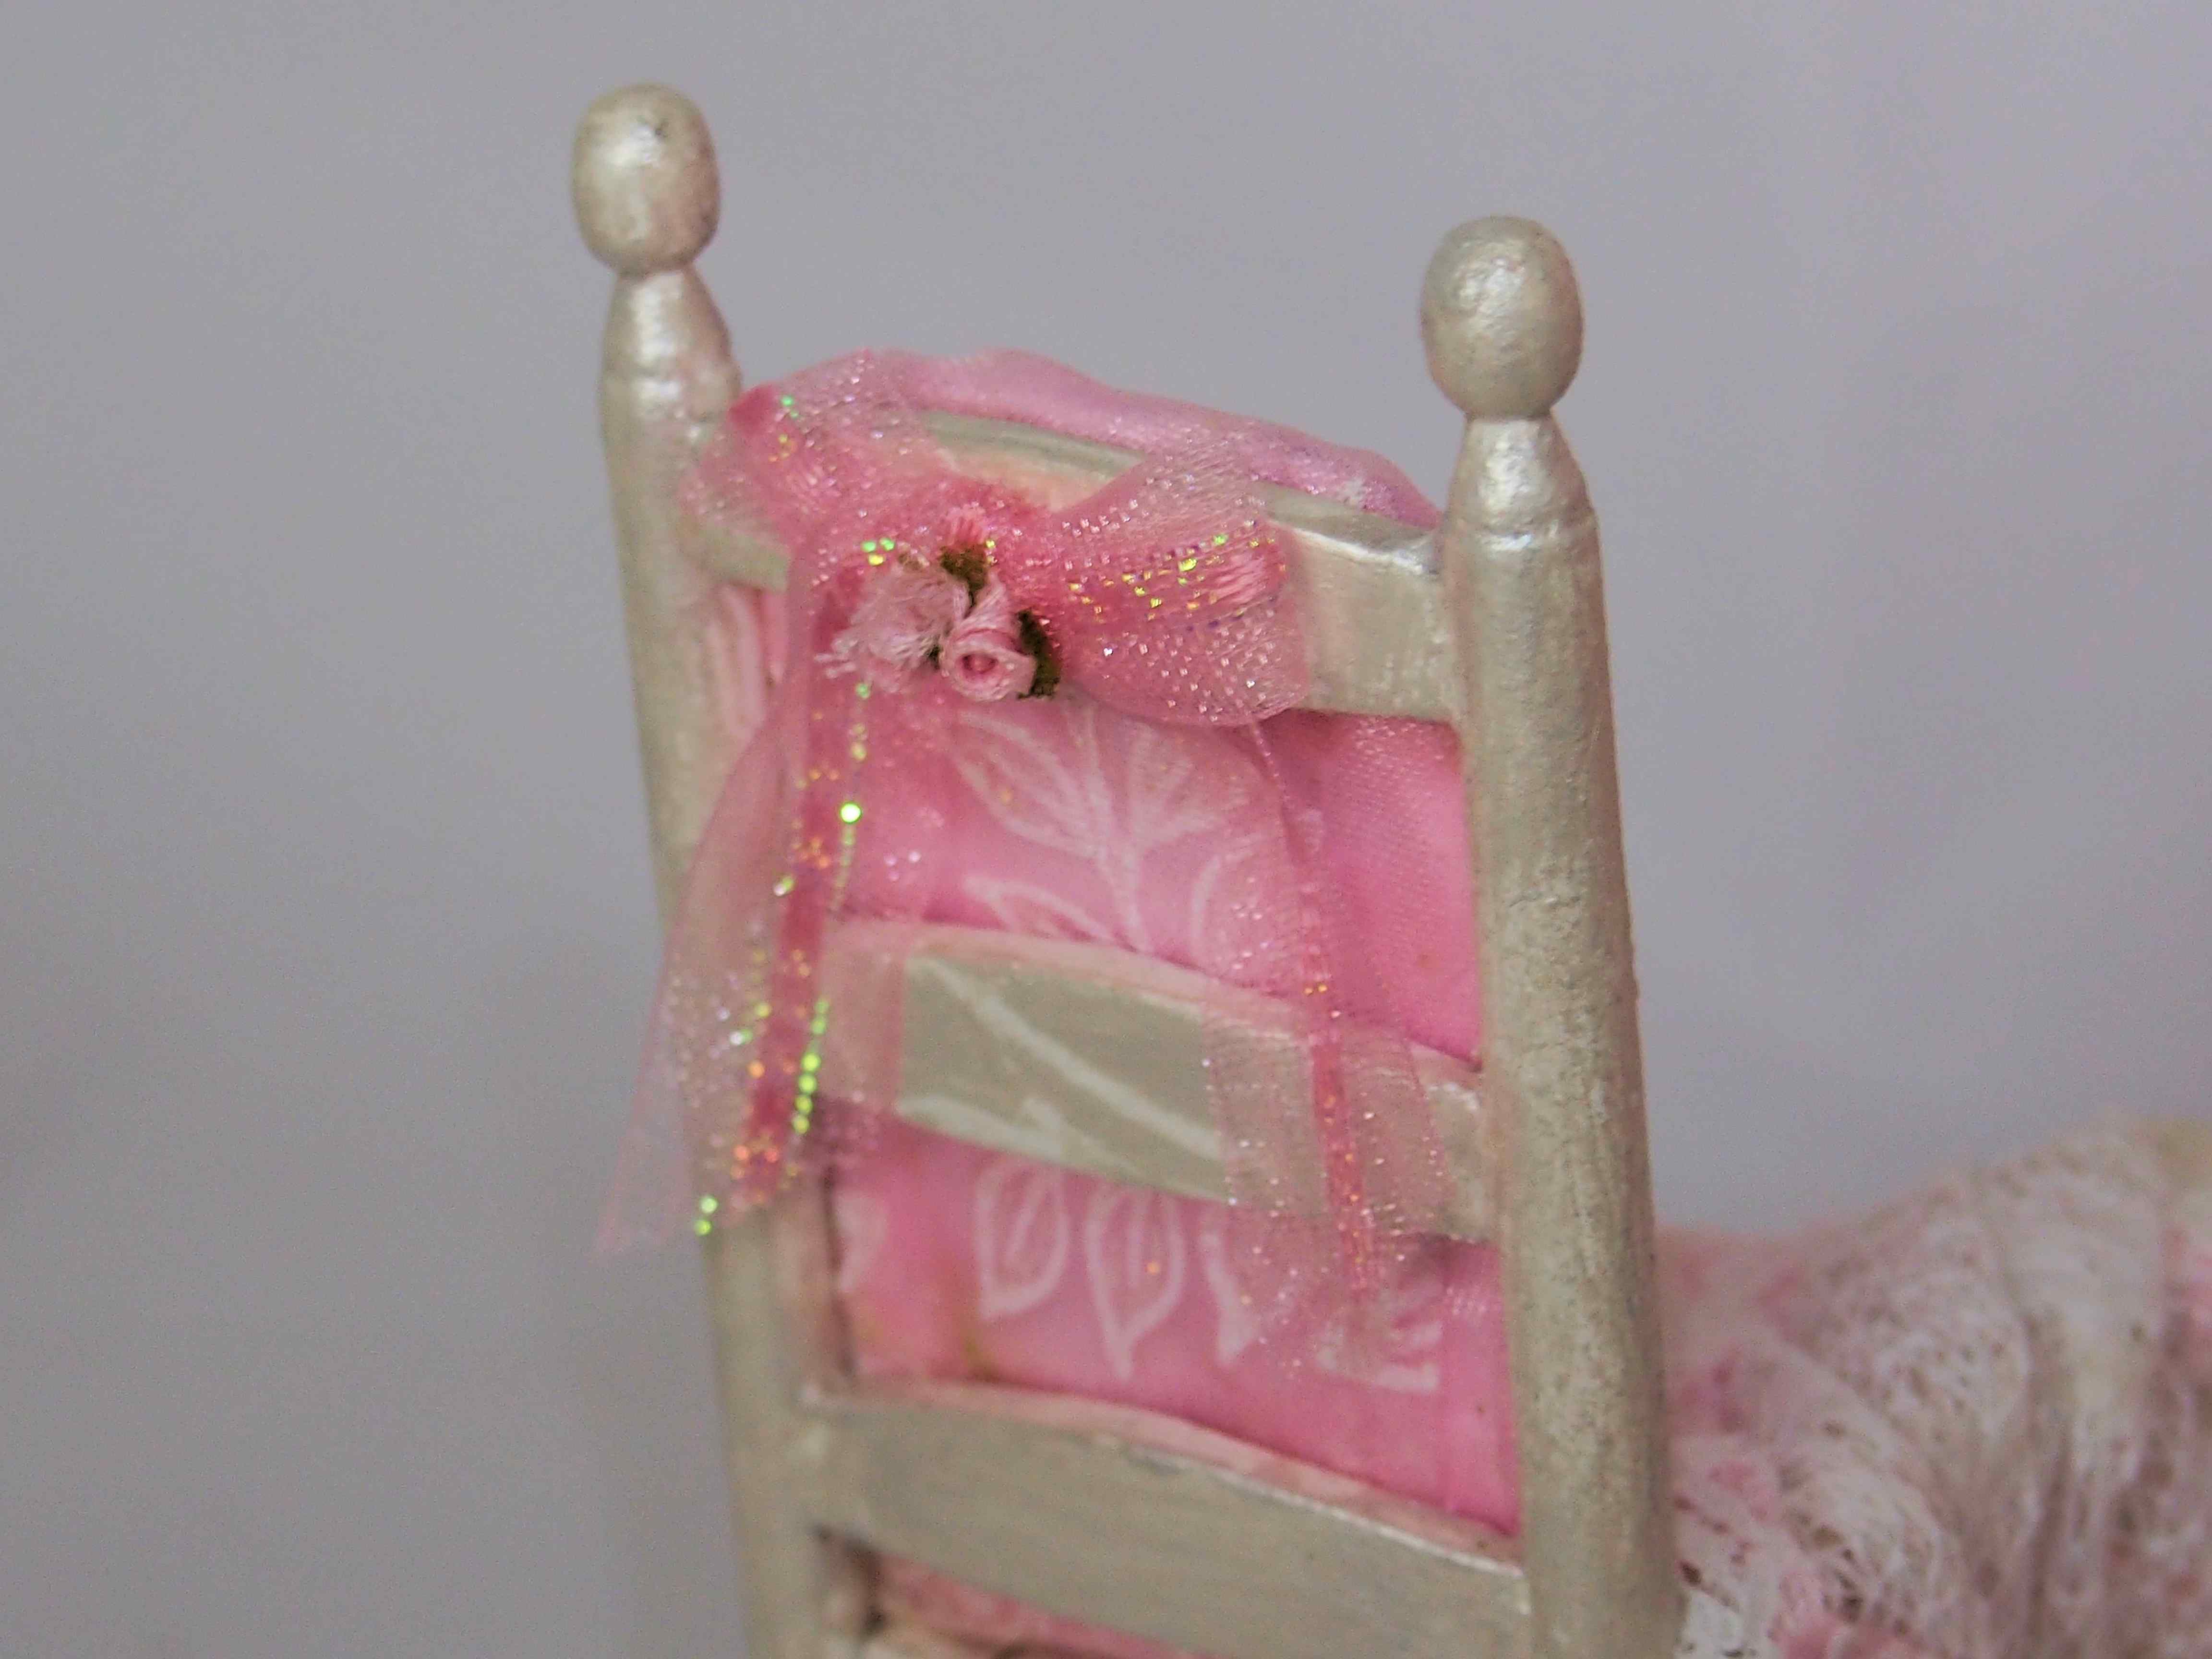 Dollhouse Miniature Pink Canopy Bedroom Set by Serena Johnson - Click Image to Close